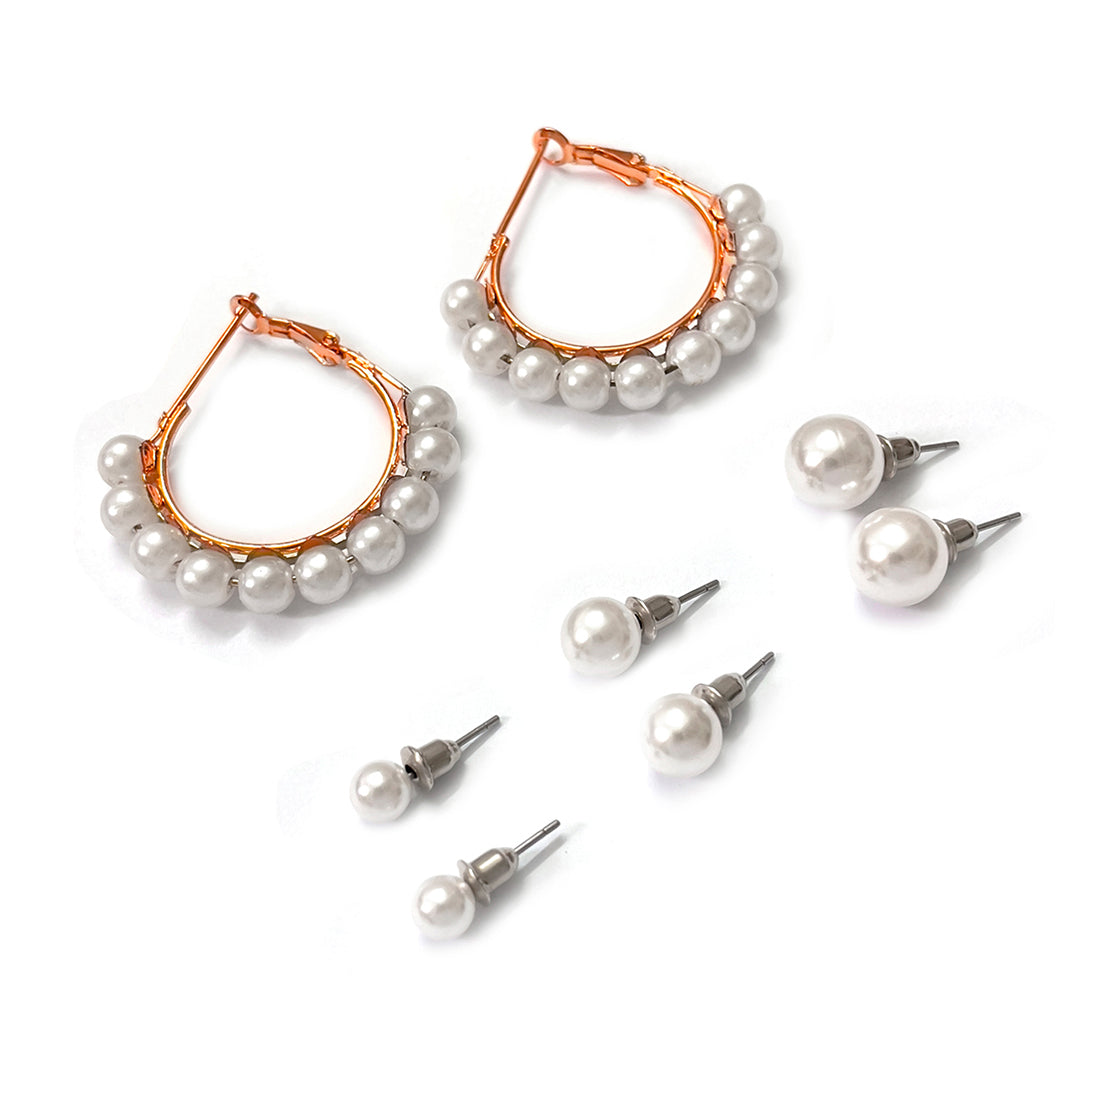 Set Of 4 Pearl Studs In Different Sizes & Rose Gold-Toned Pearl Studded Hoop Earrings